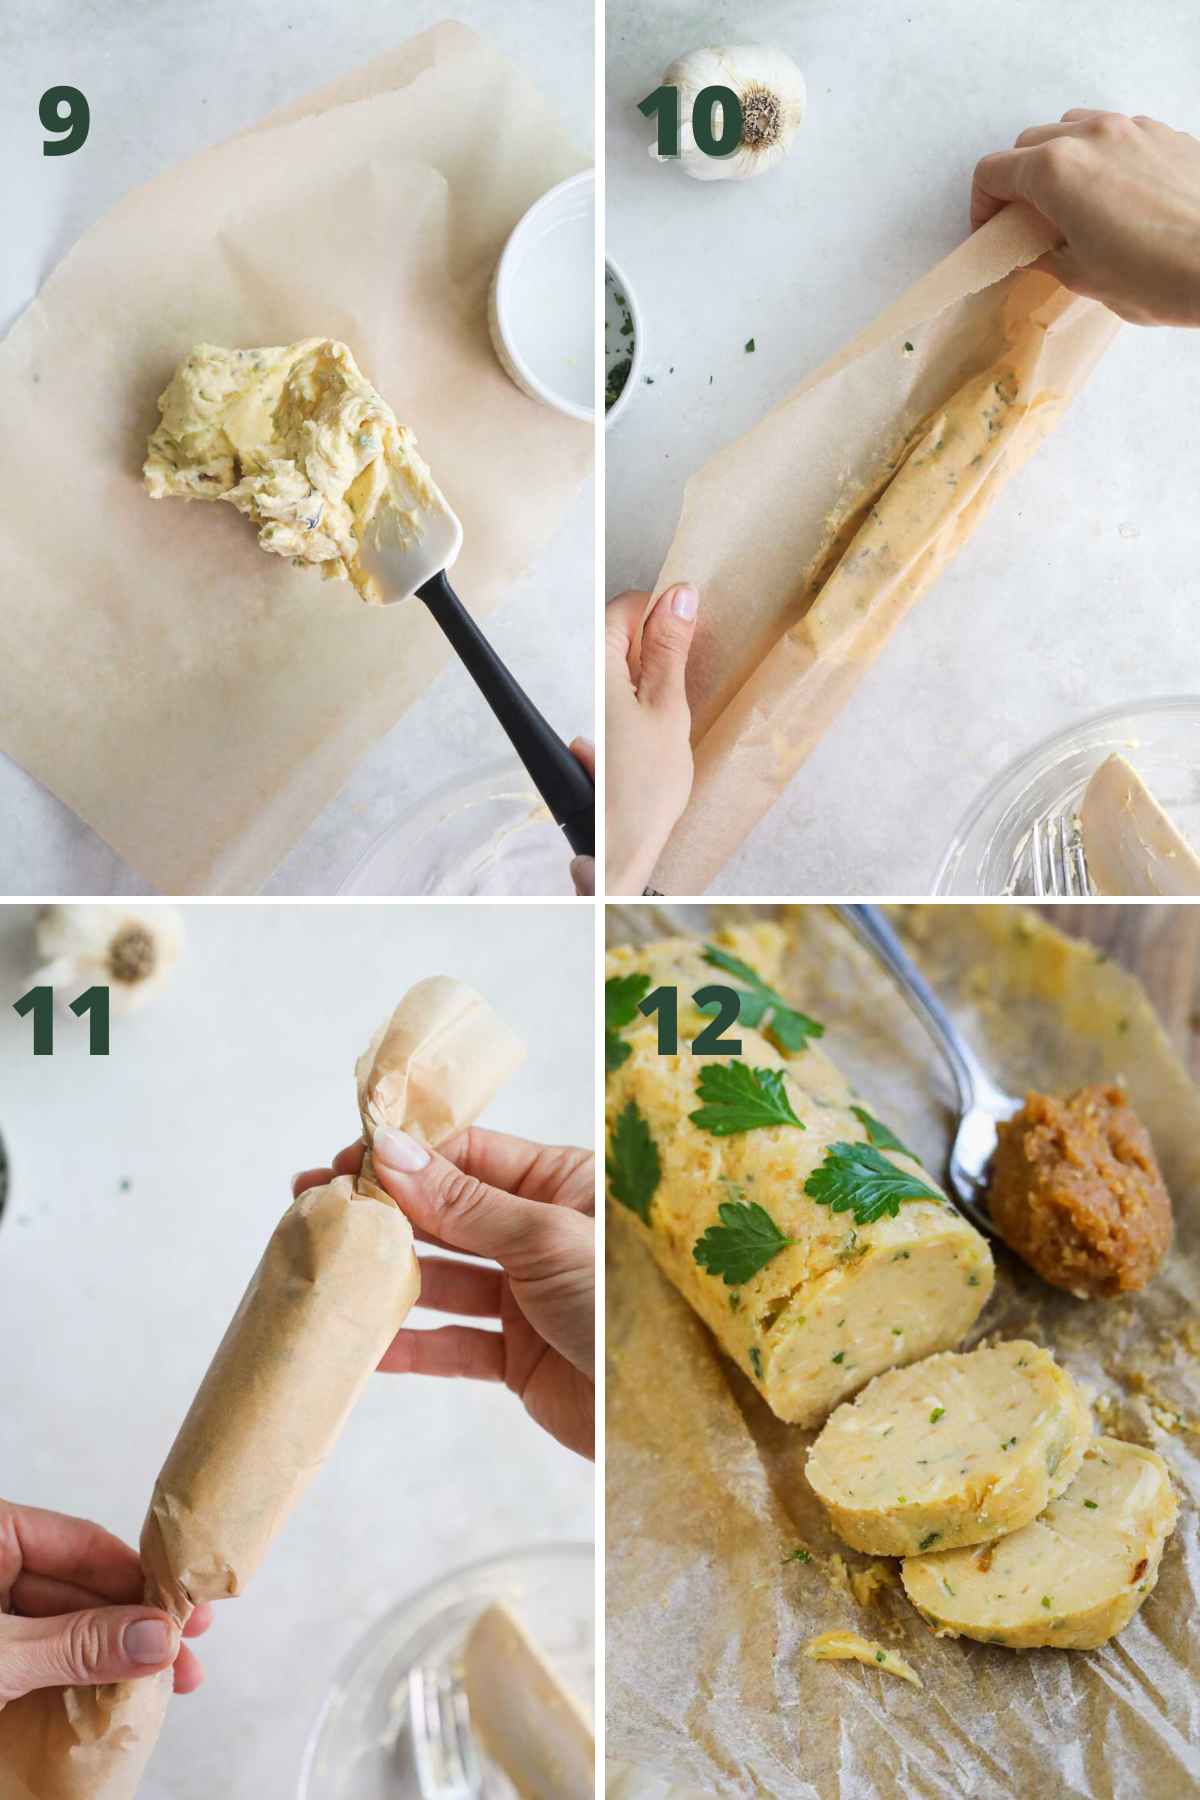 Steps to make miso garlic butter paste, add butter to parchment paper, roll into a log, and serve.